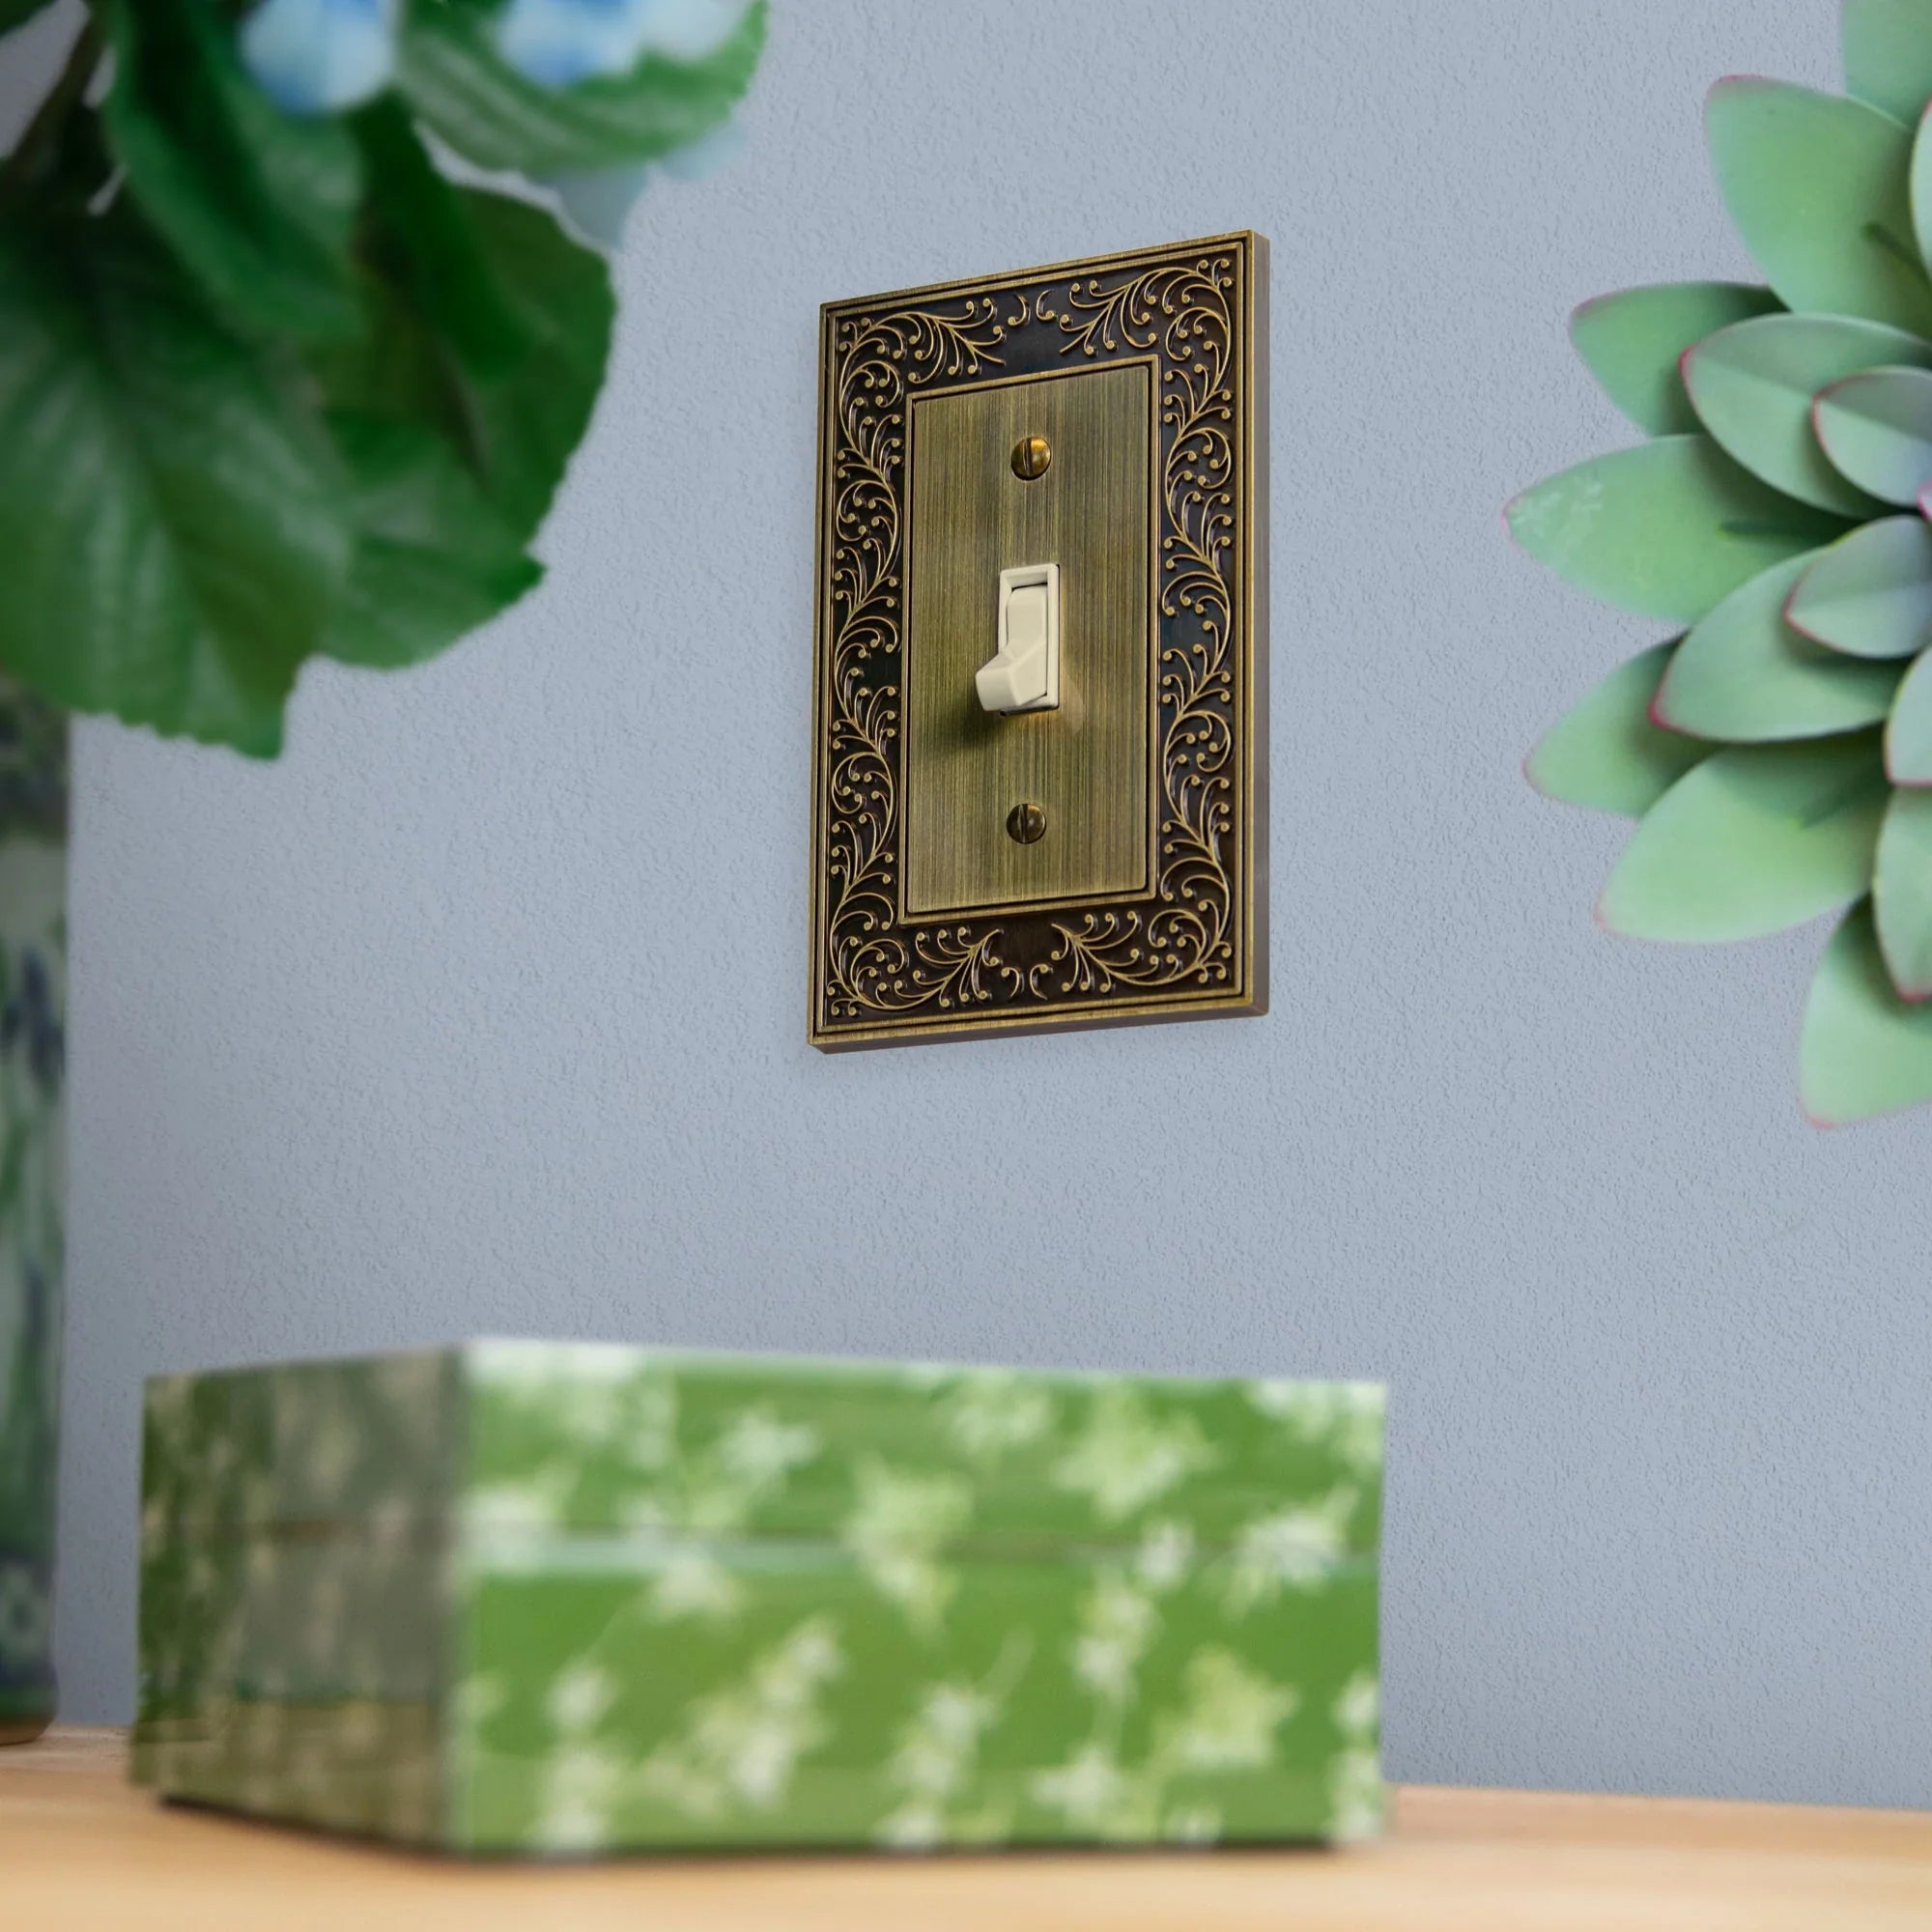 English Garden Brushed Brass Cast - 4 Toggle Wallplate